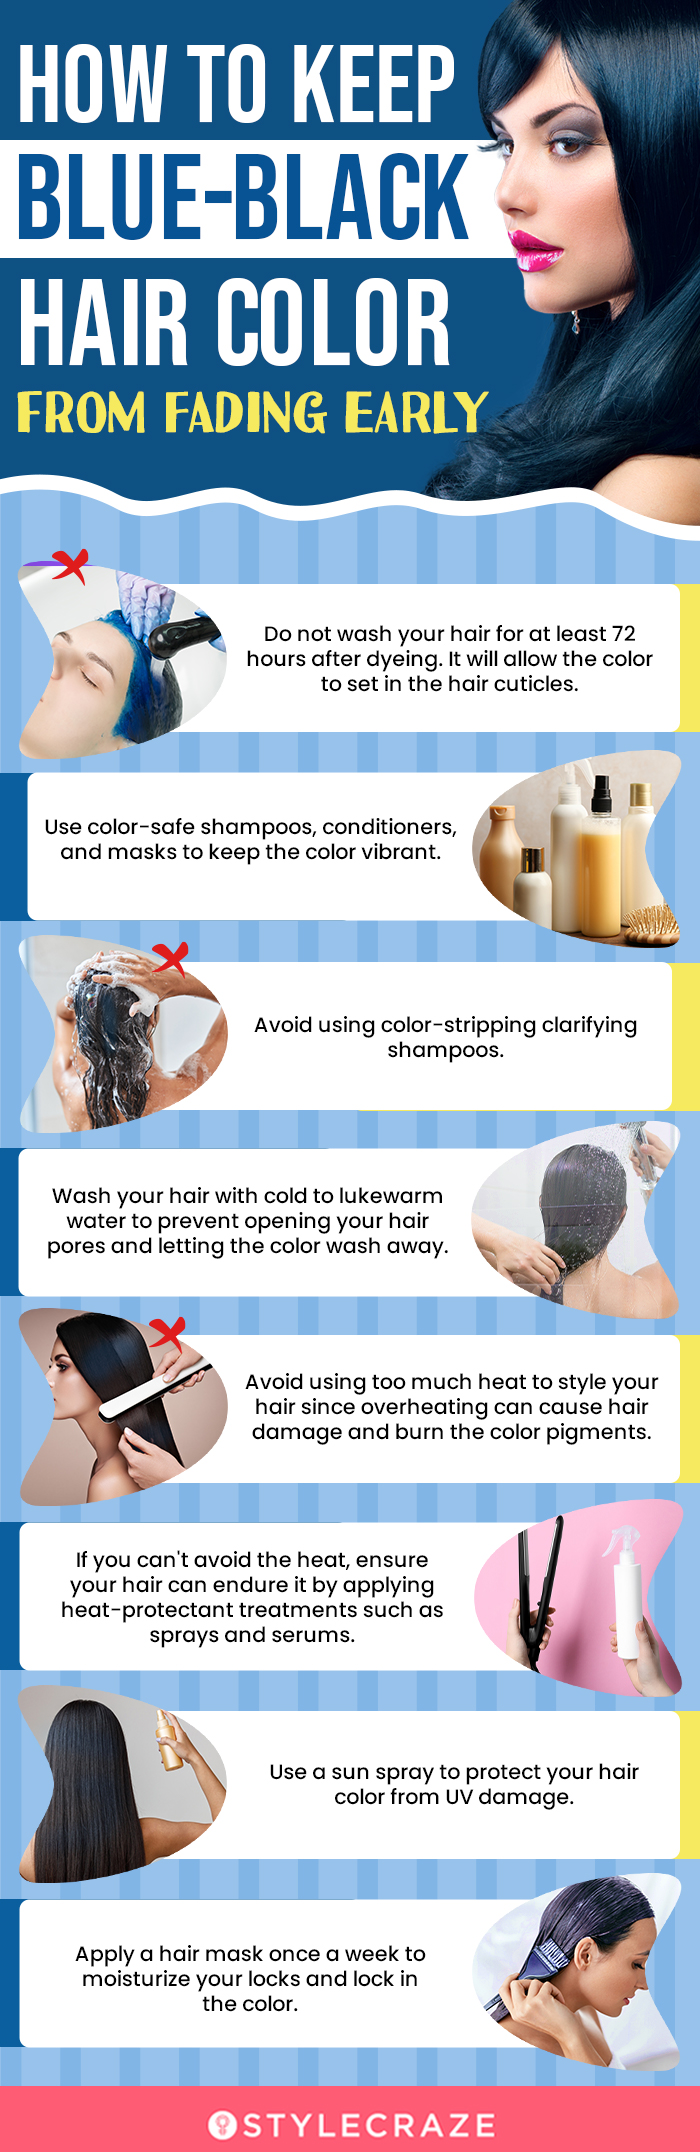 How To Keep Blue-Black Hair Color From Fading Early [infographic]